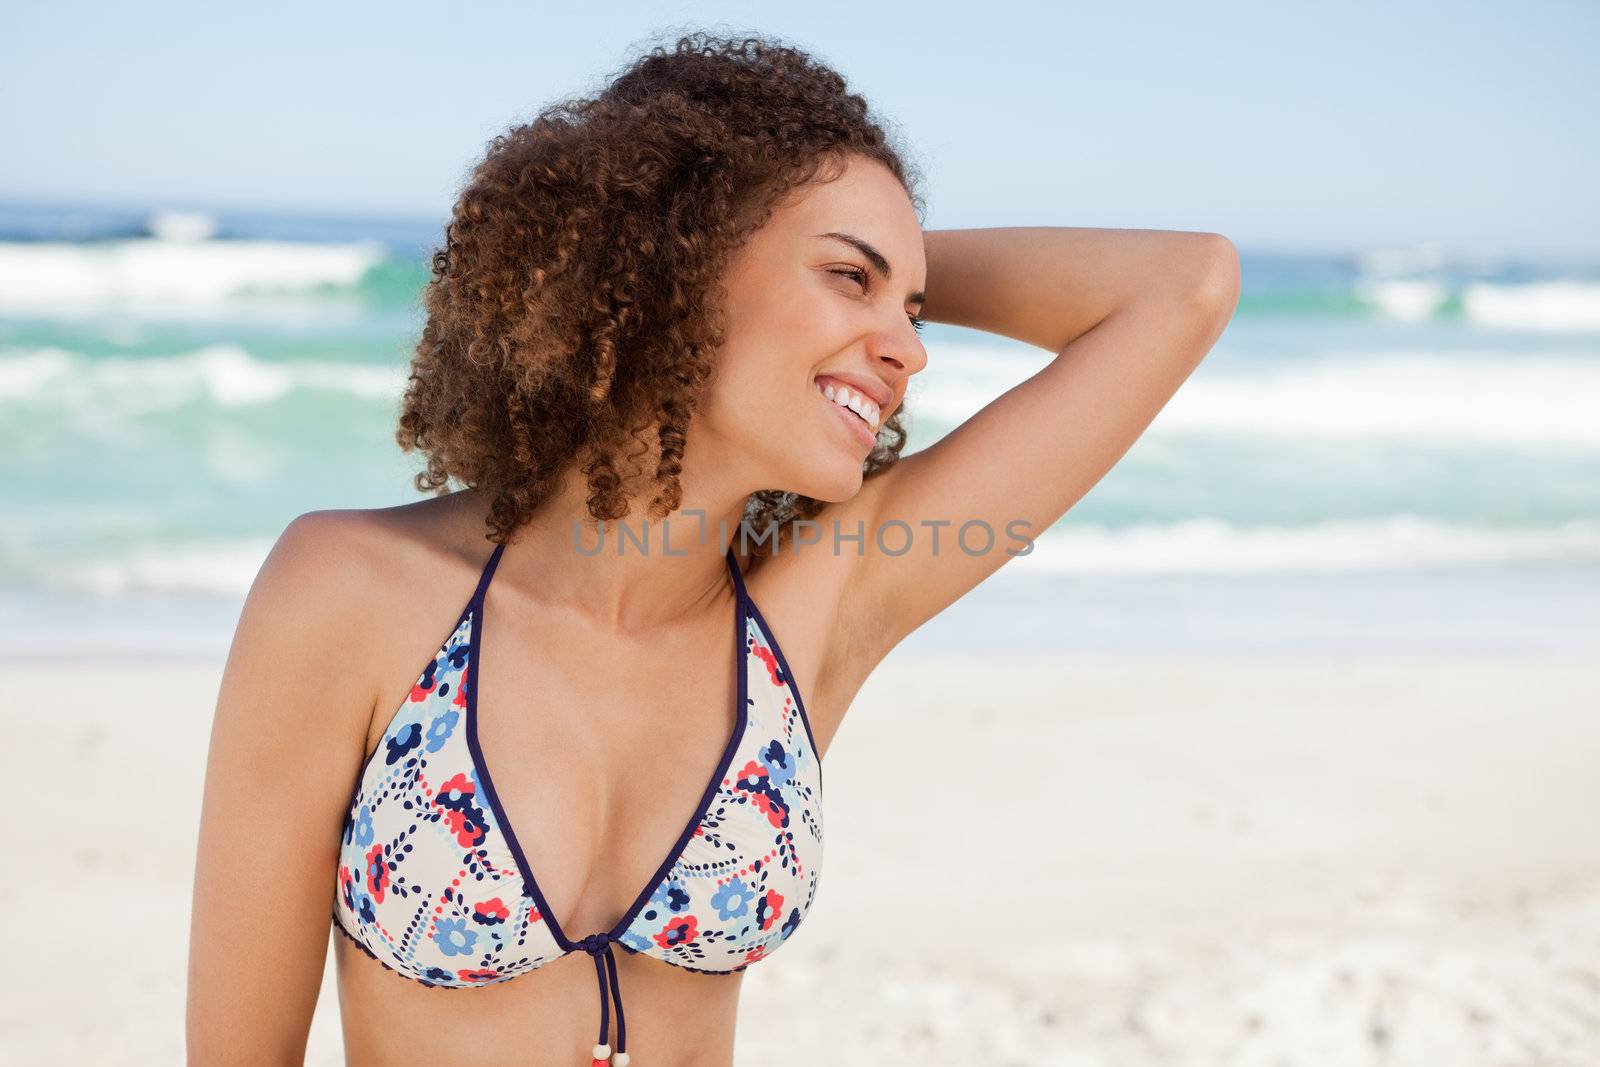 Young woman placing her hand on her hair while wearing a swimsui by Wavebreakmedia